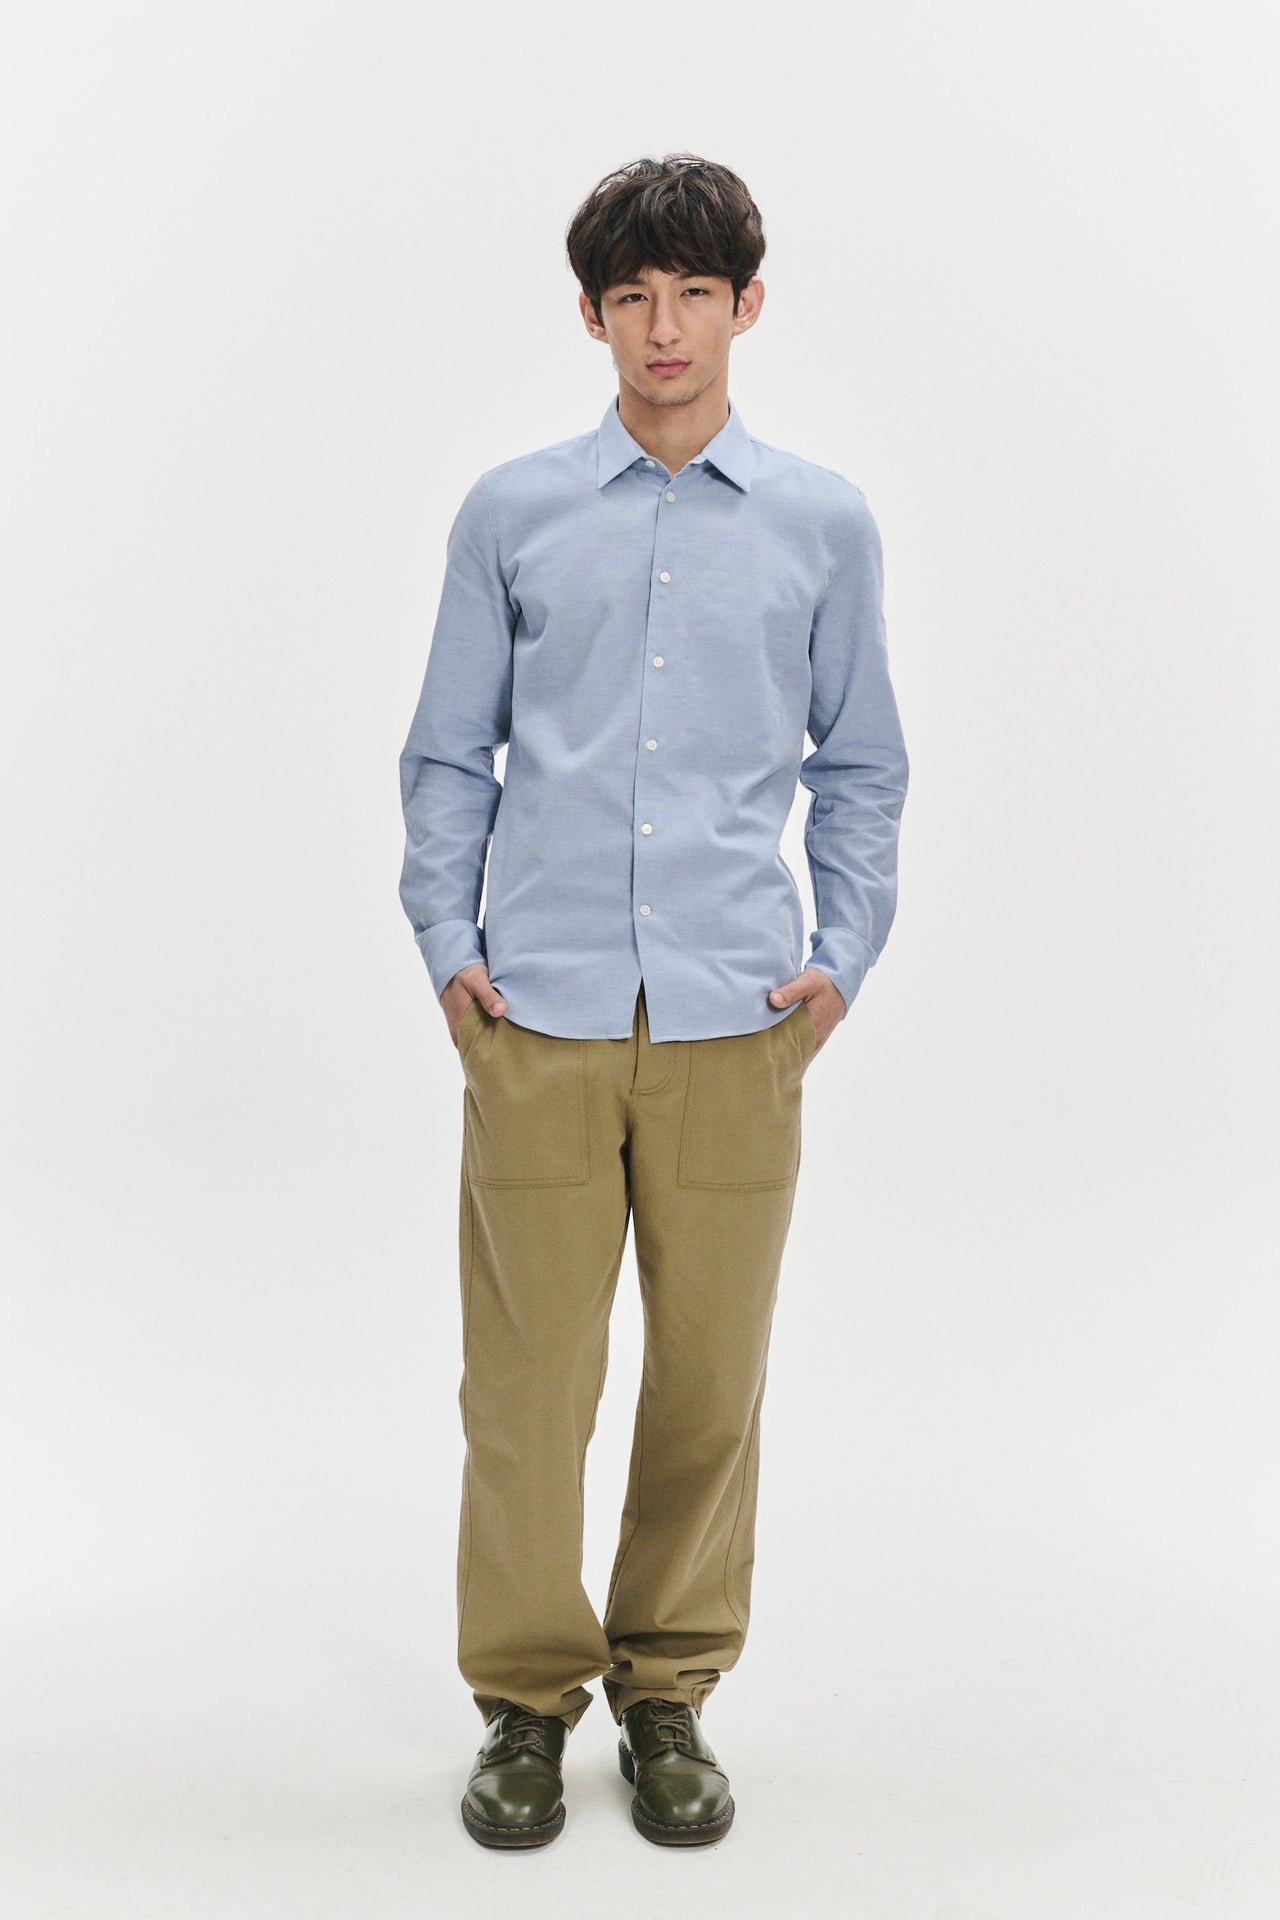 Feel Good Shirt in the Finest High Twist Cotton by Albini